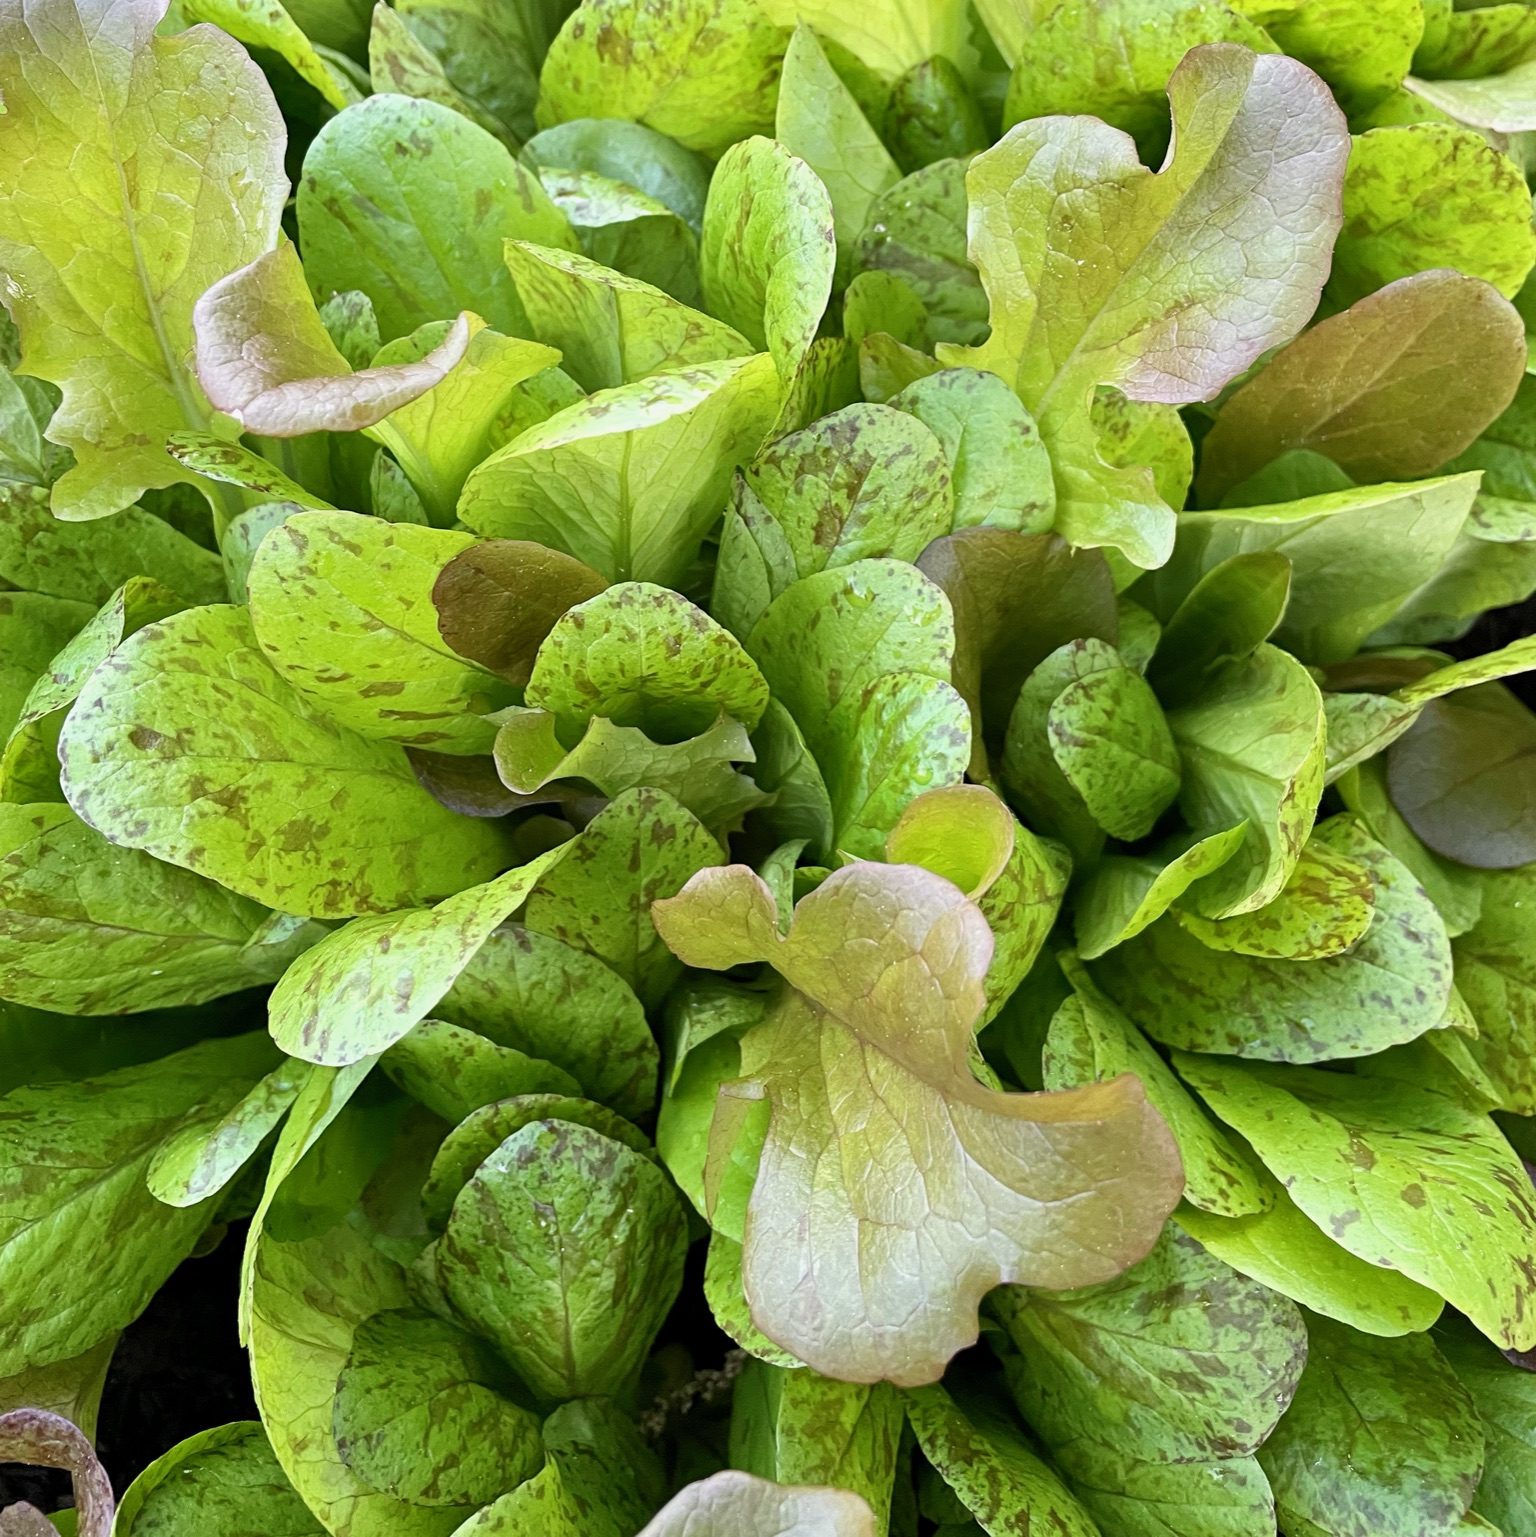 Close-up of lettuce growing in a garden bed